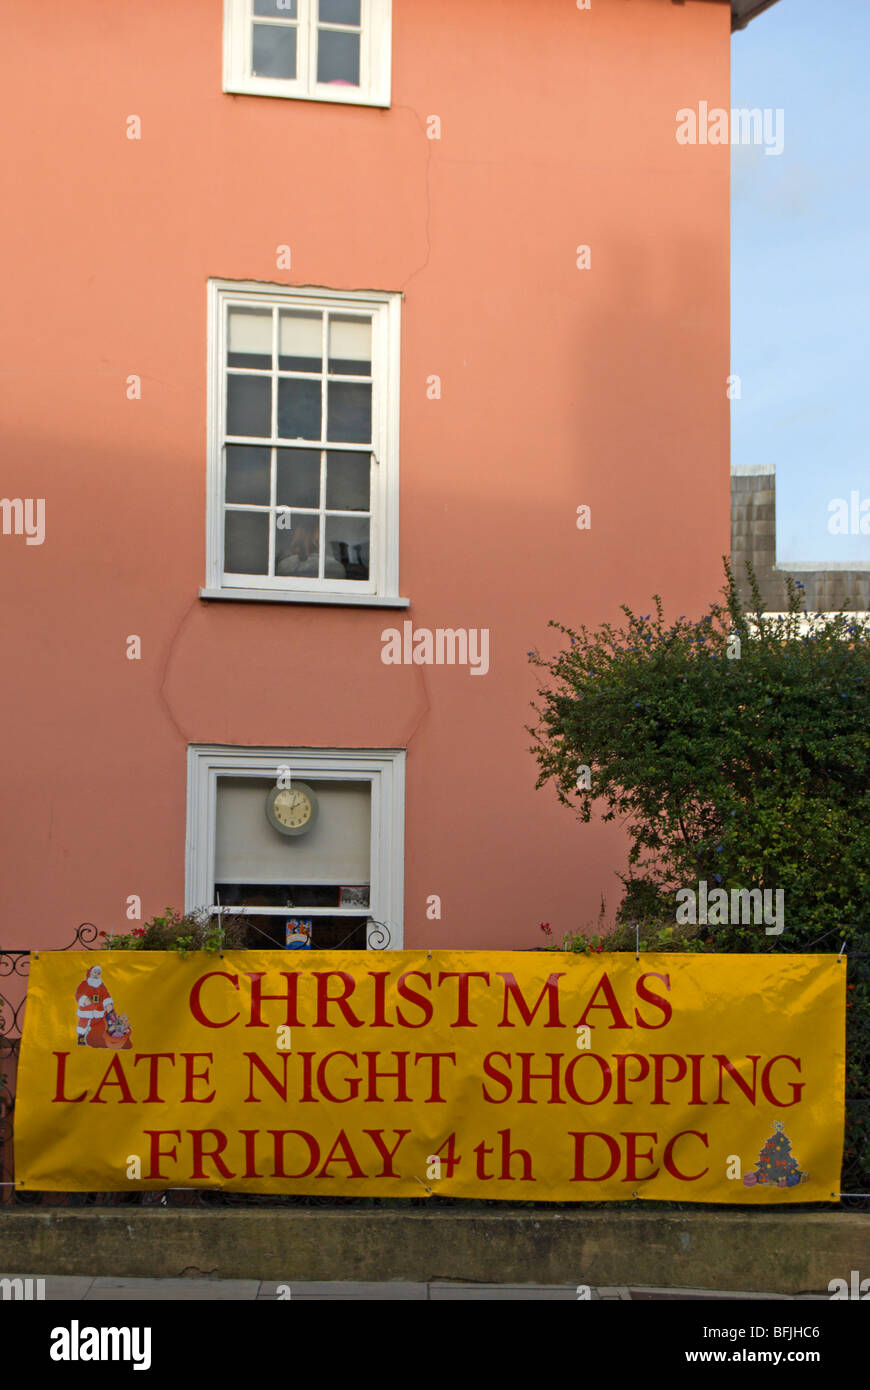 christmas late night shopping banner in barnes high street, southwest london, england Stock Photo